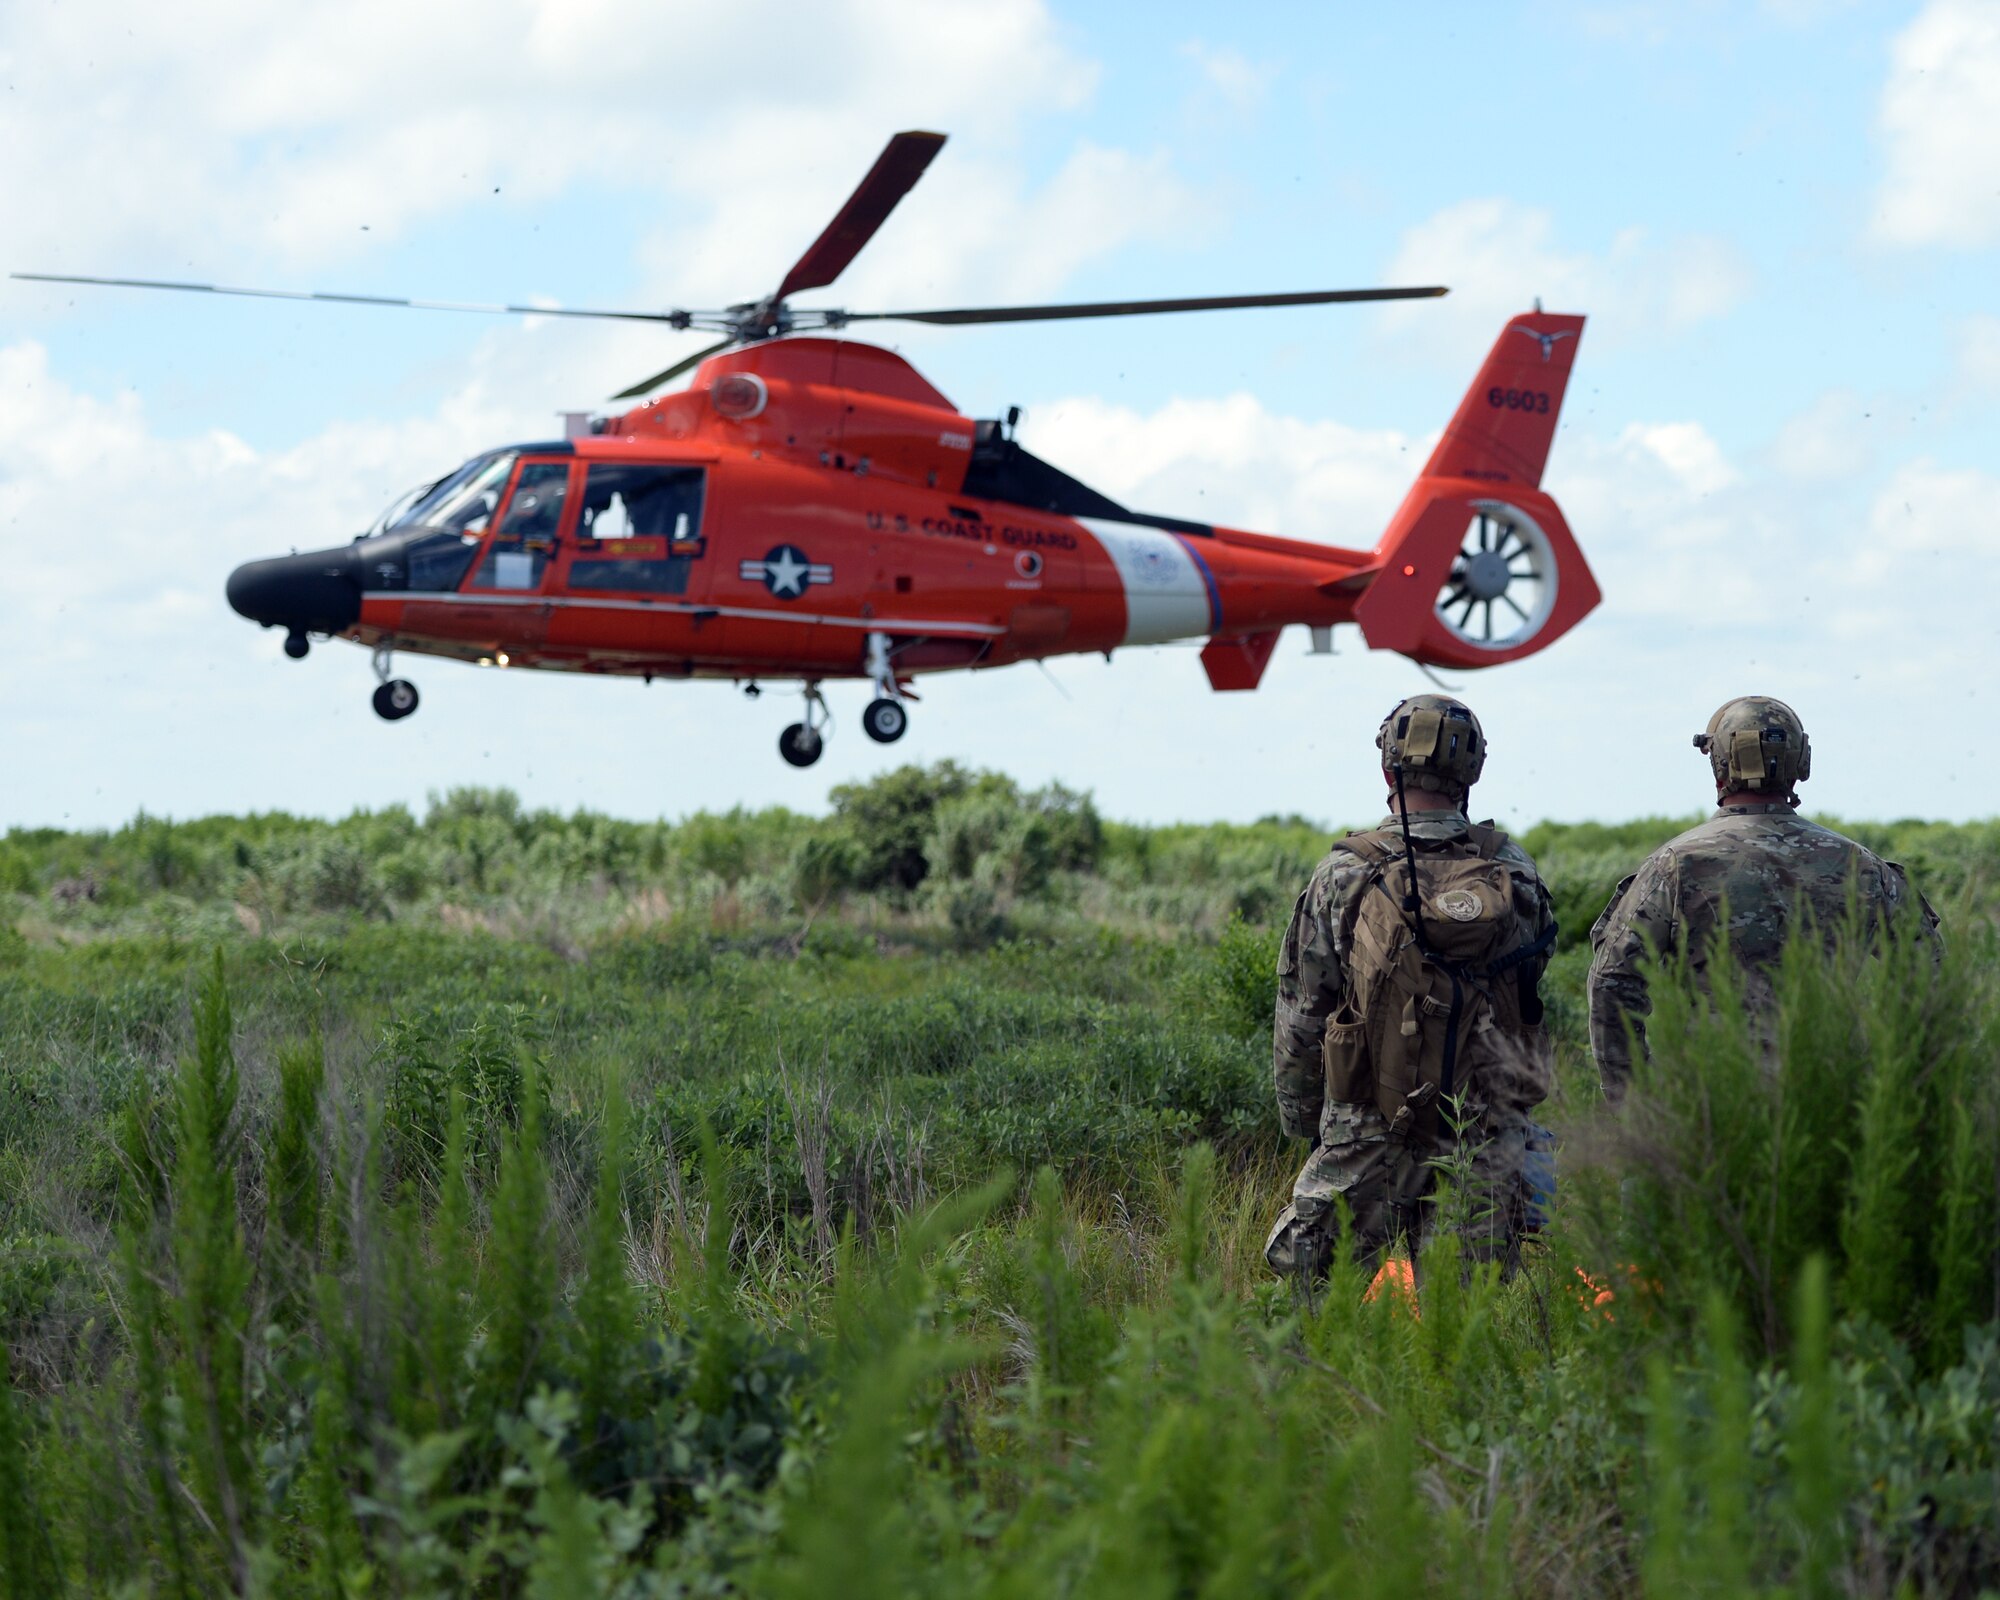 Tactical Air Control Party members with the 147th Air Support Operations Squadron; 147th Reconnaissance Wing, observe a U.S. Coast Guard MH-65 Dauphin land in a landing zone they established during a domestic response resupply exercise June 7, 2014, at Galveston State Park. With the 2014 hurricane season underway, the training allowed the TACPs to exercise response efforts with the Coast Guard members, performing helicopter landing zone operations, aerial resupply and sling load operations.